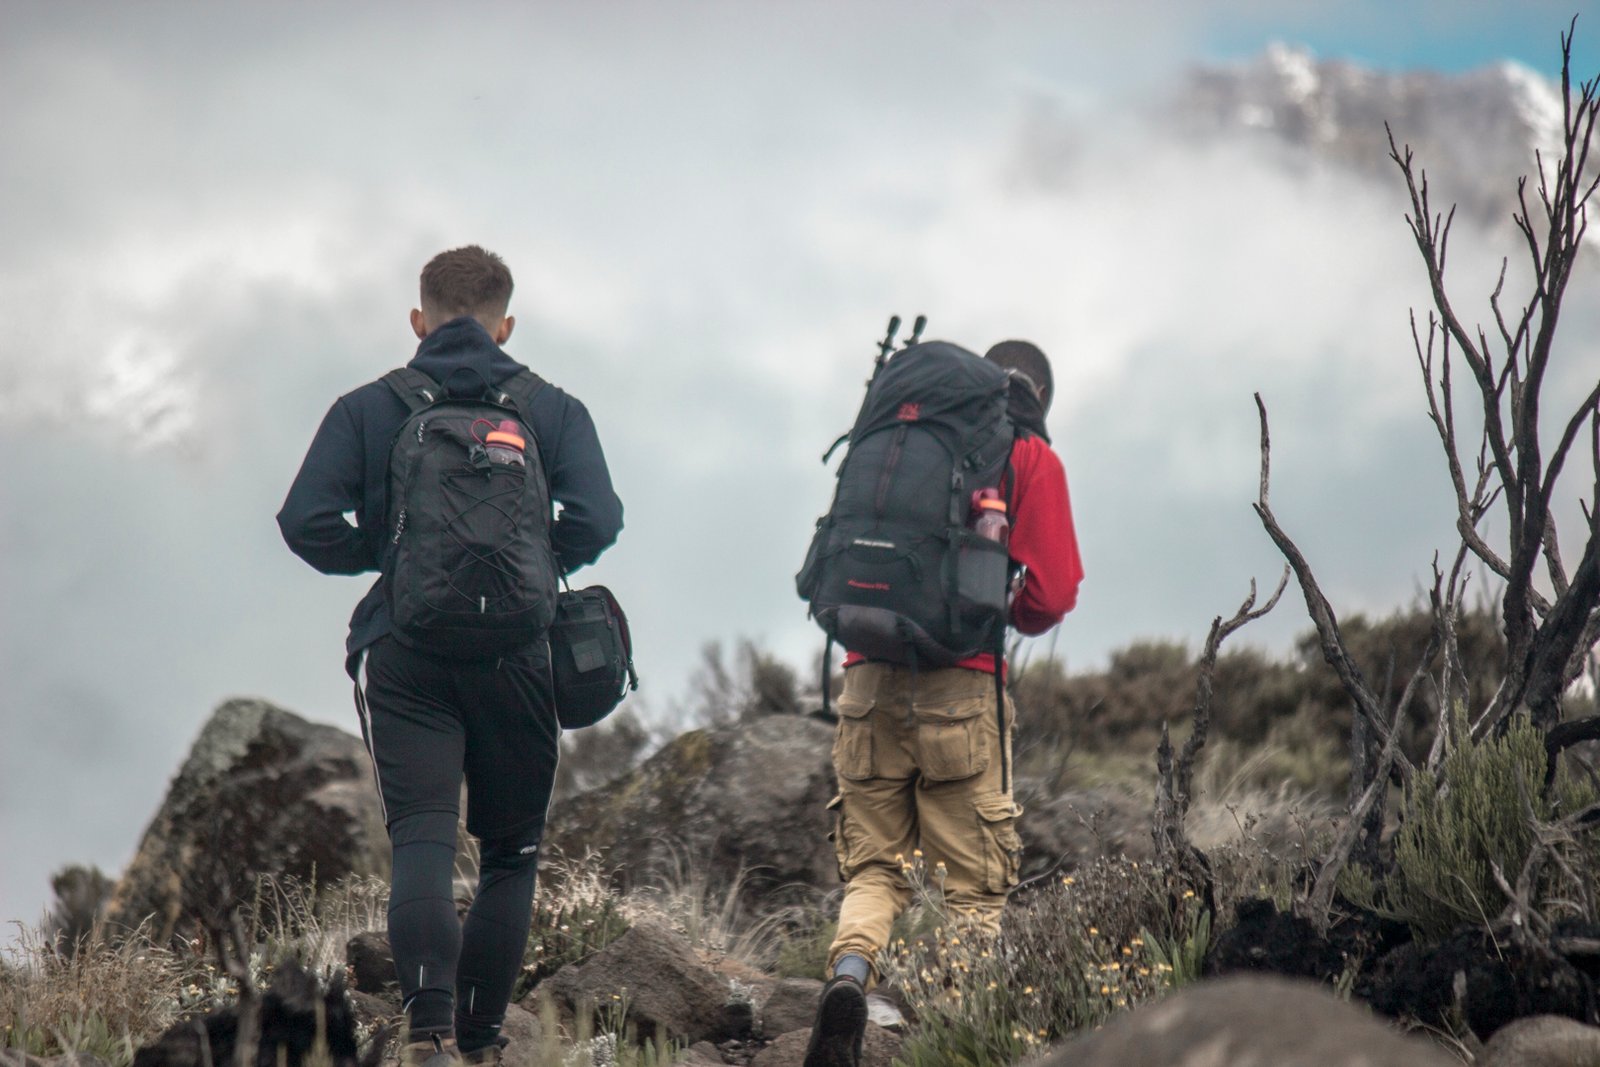 The Best 6-days/5nights Kilimanjaro Lemosho Route Superior Ultimate Adventure in Trekking – Climbing with Affordable Prices and High Successfully rate itinerary